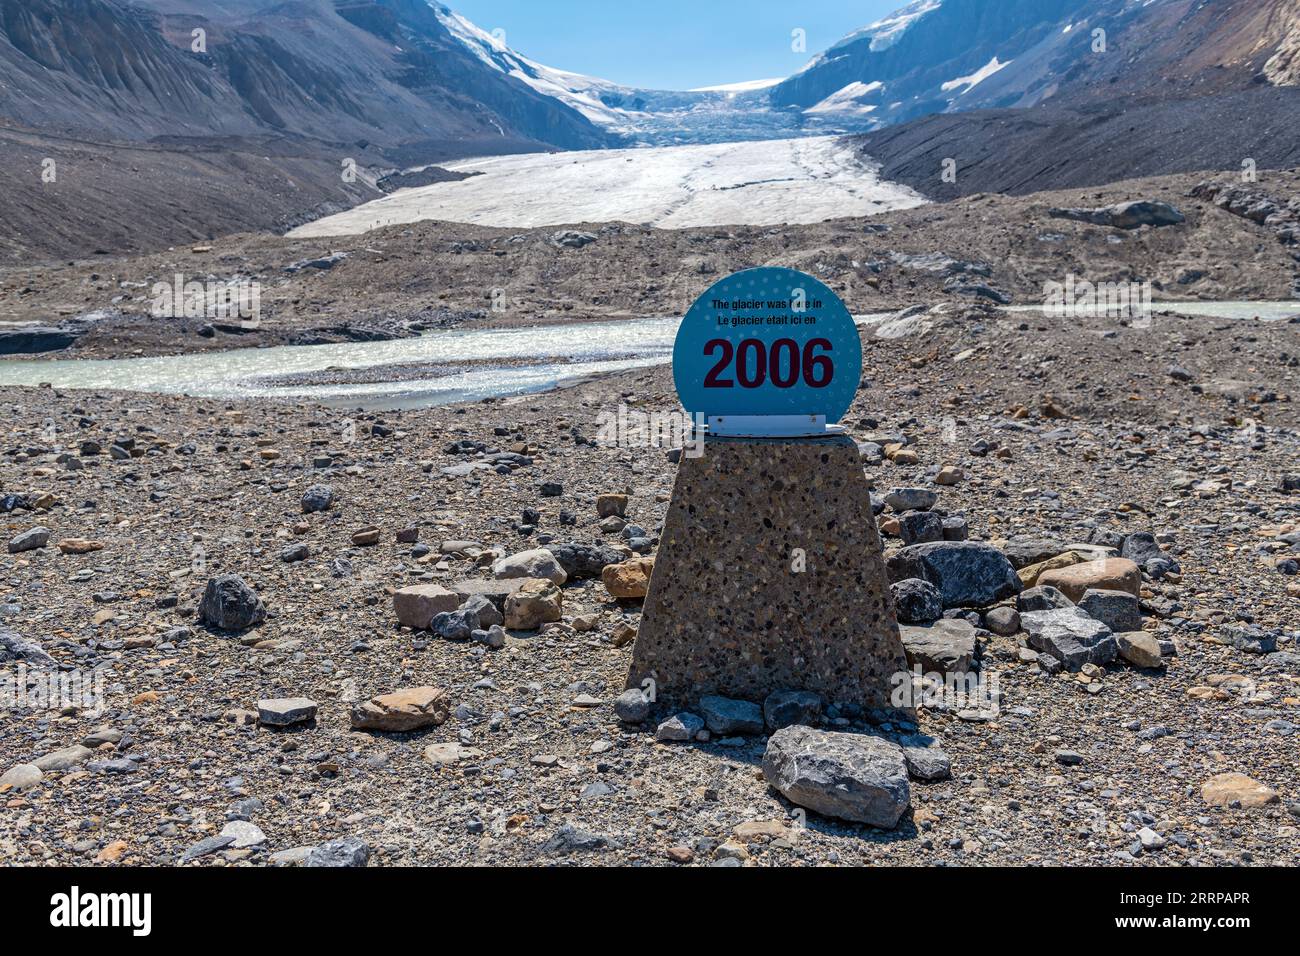 Athabasca Glacier with retreat between 2006 and 2023 due to climate change, Jasper and Banff national park, Icefields parkway, Canada. Stock Photo